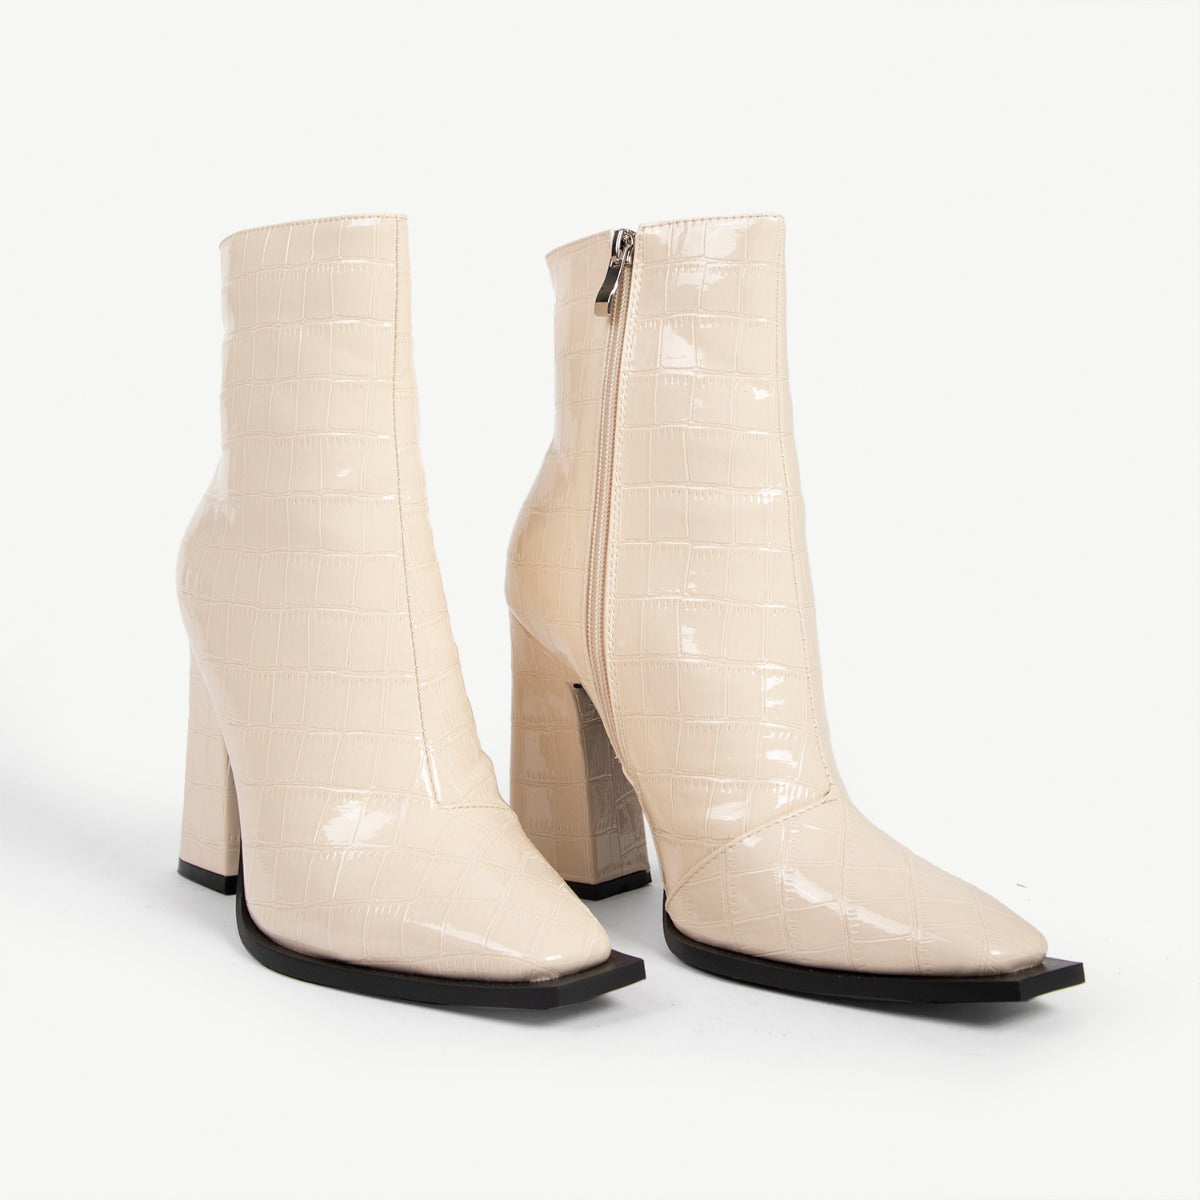 RAID Livvy Block Heeled Ankle Boot in White Croc